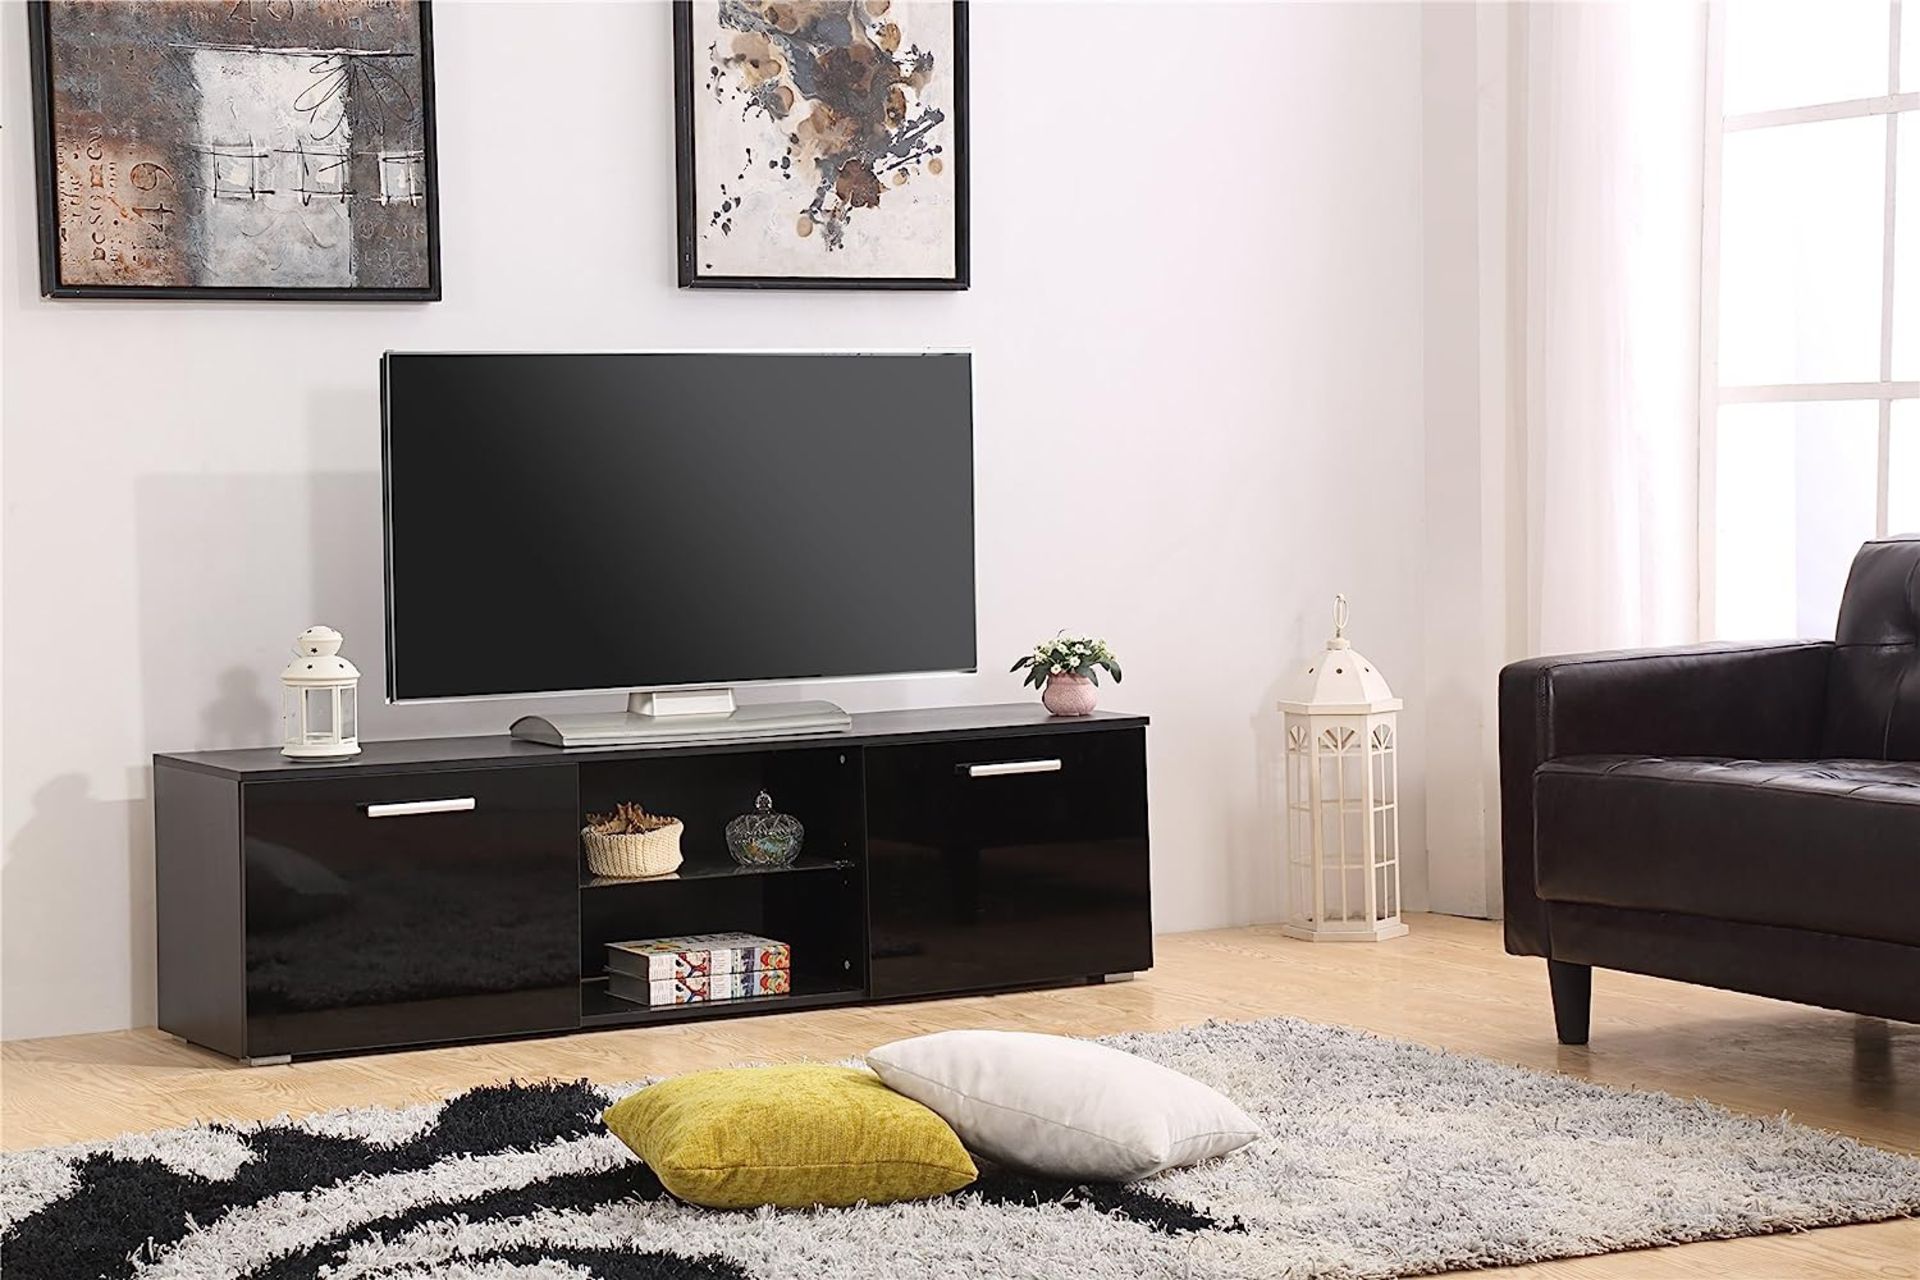 HARMIN MODERN 160CM TV STAND CABINET UNIT WITH HIGH GLOSS DOORS (BLACK ON BLACK) - Image 2 of 9